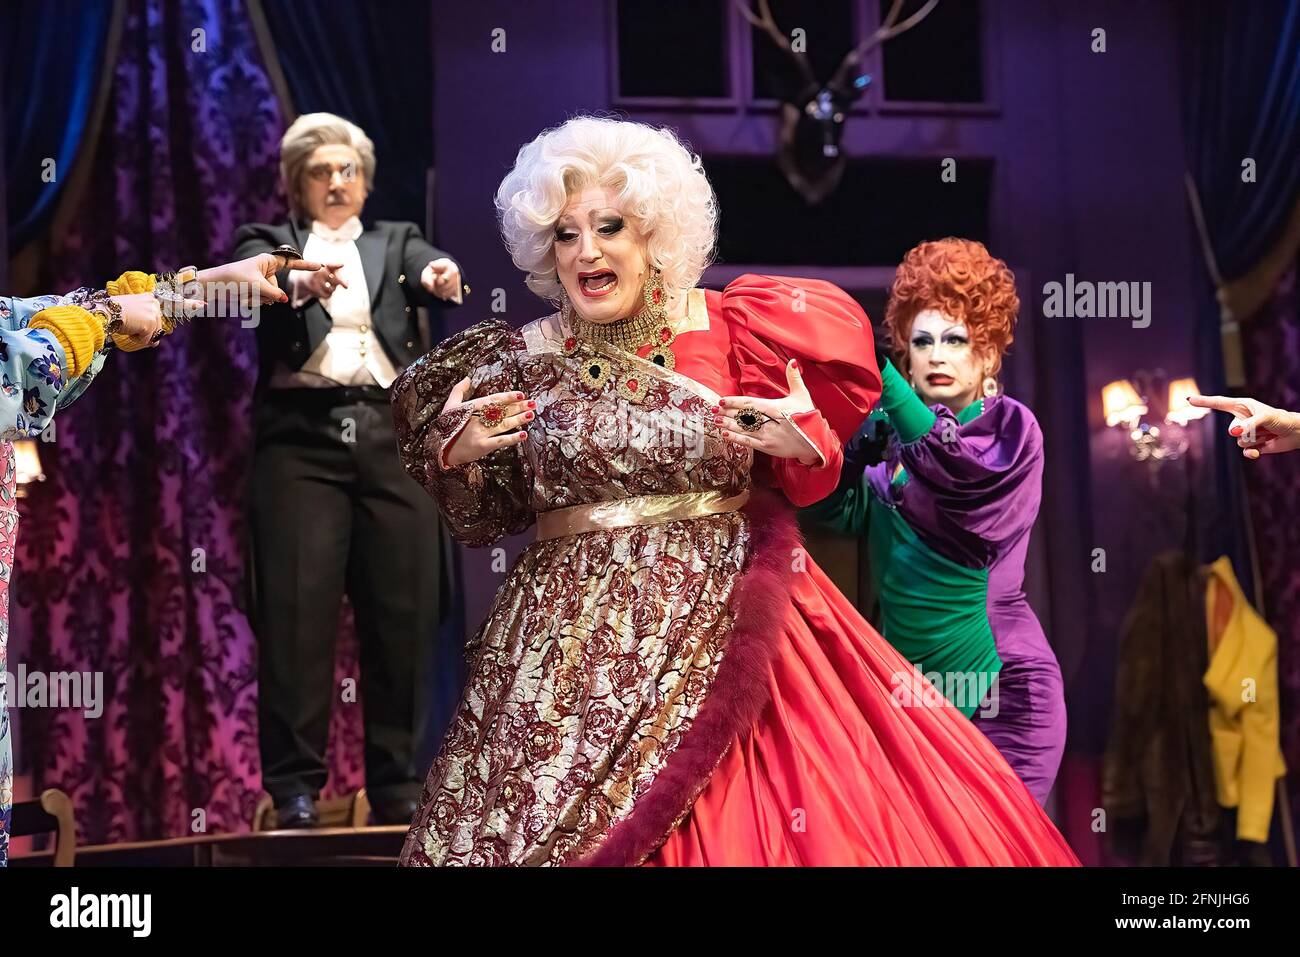 London, UK. 17th May, 2021. Holly Stars, Louis Cyfer, Myra Dubois, Anna Phylactic and William Belli perform live during the preview of 'Death Drop' at Garrick Theatre in London. The hilarious murder mystery musical returns to the Garrick Theatre from 19 May 2021. (Photo by Loredana Sangiuliano/SOPA Images/Sipa USA) Credit: Sipa USA/Alamy Live News Stock Photo